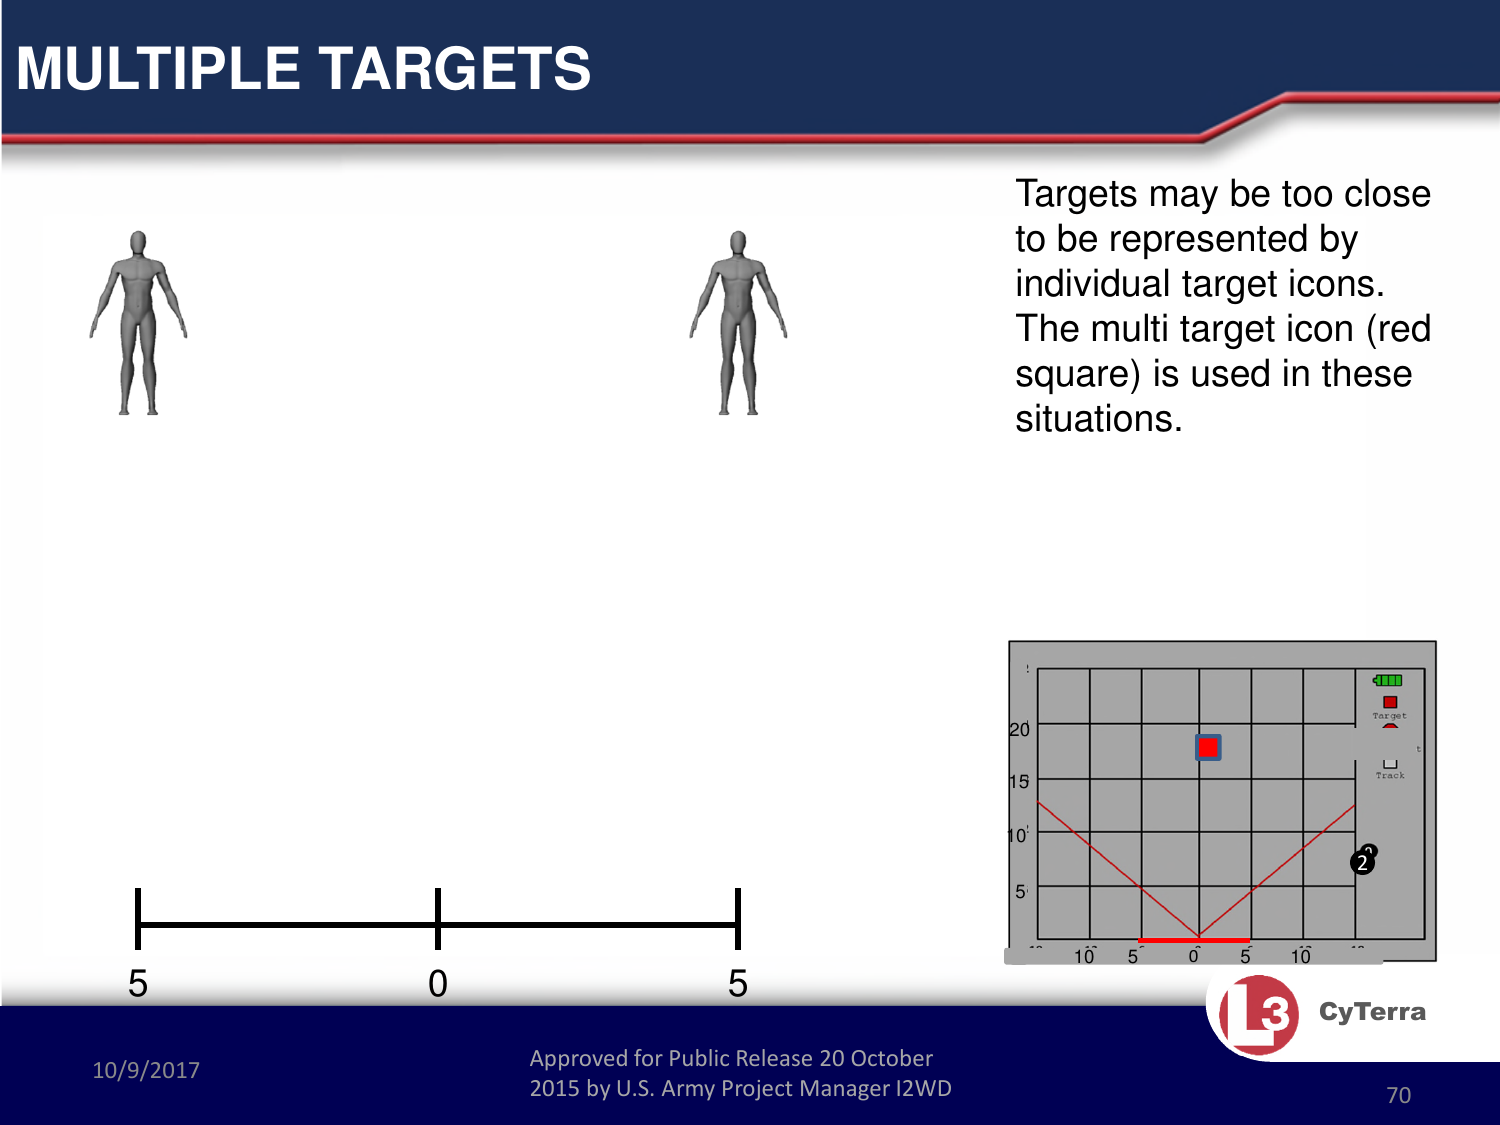 Approved for Public Release 20 October 2015 by U.S. Army Project Manager I2WD10/9/2017 Approved for Public Release 20 October 2015 by U.S. Army Project Manager I2WD 70CyTerra1Targets may be too close to be represented by individual target icons. The multi target icon (red square) is used in these situations.0 55MULTIPLE TARGETS205 1010 55101520